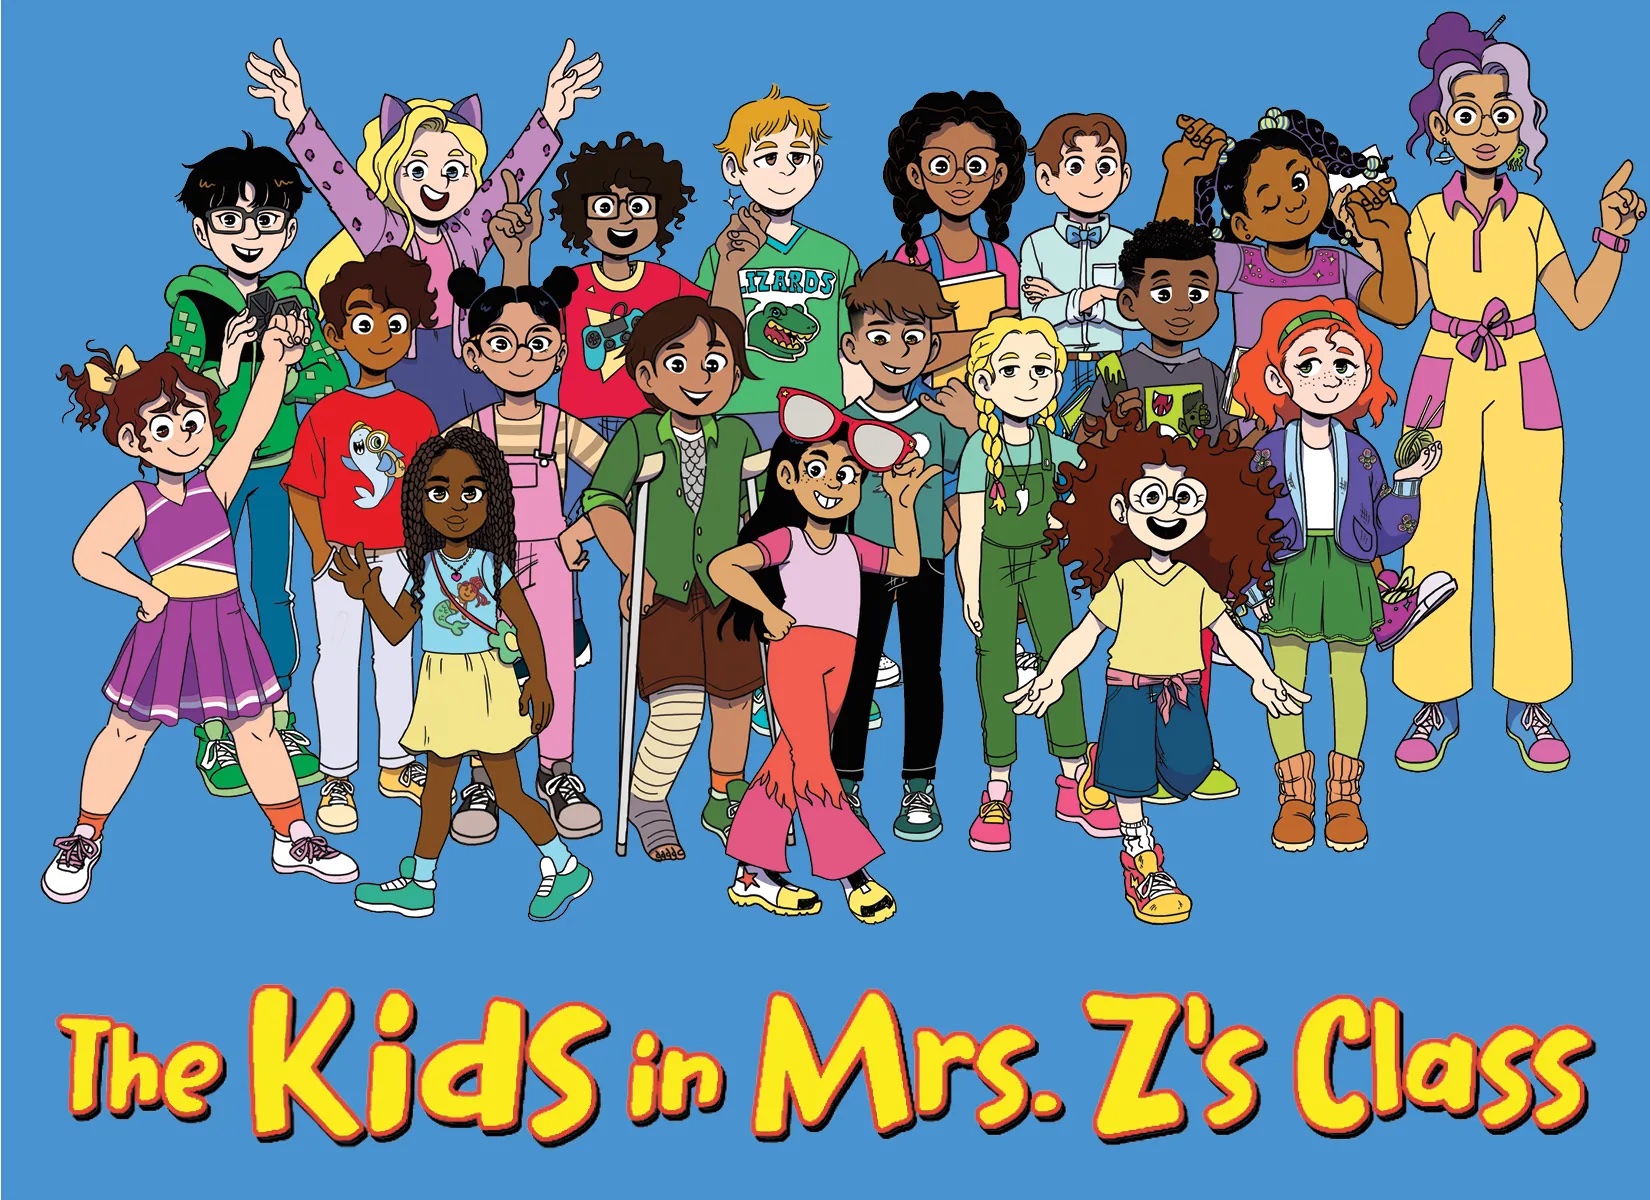 17 Authors, 18 Books: The Ambitious Kid Lit Collaboration That Created 'Mrs. Z's Class'